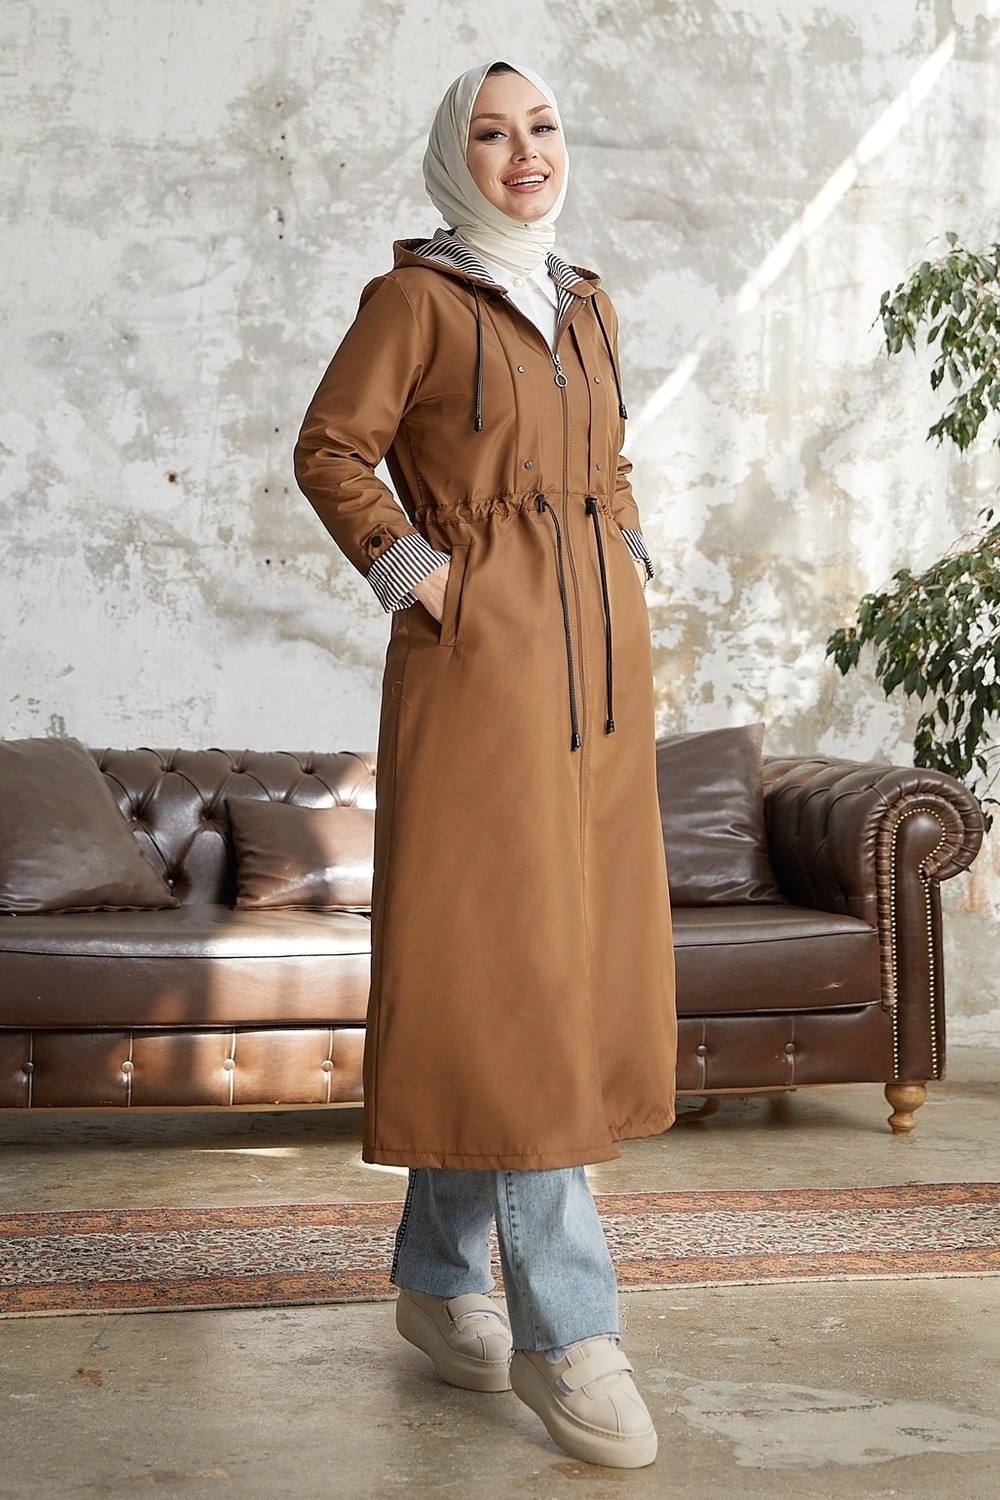 InStyle Flocked Striped Pattern Long Trench Coat - Camel